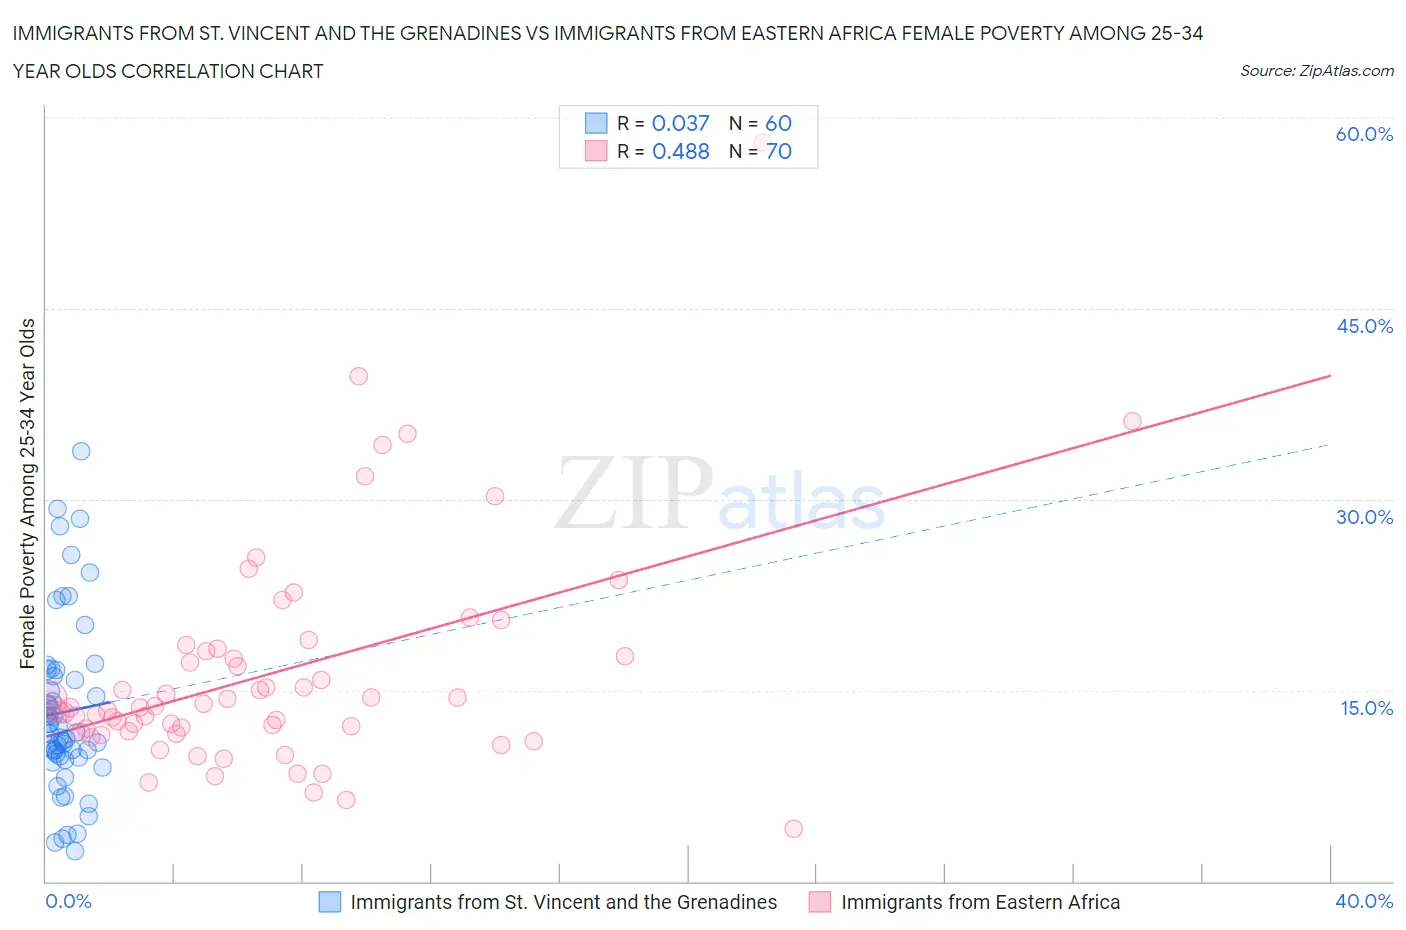 Immigrants from St. Vincent and the Grenadines vs Immigrants from Eastern Africa Female Poverty Among 25-34 Year Olds